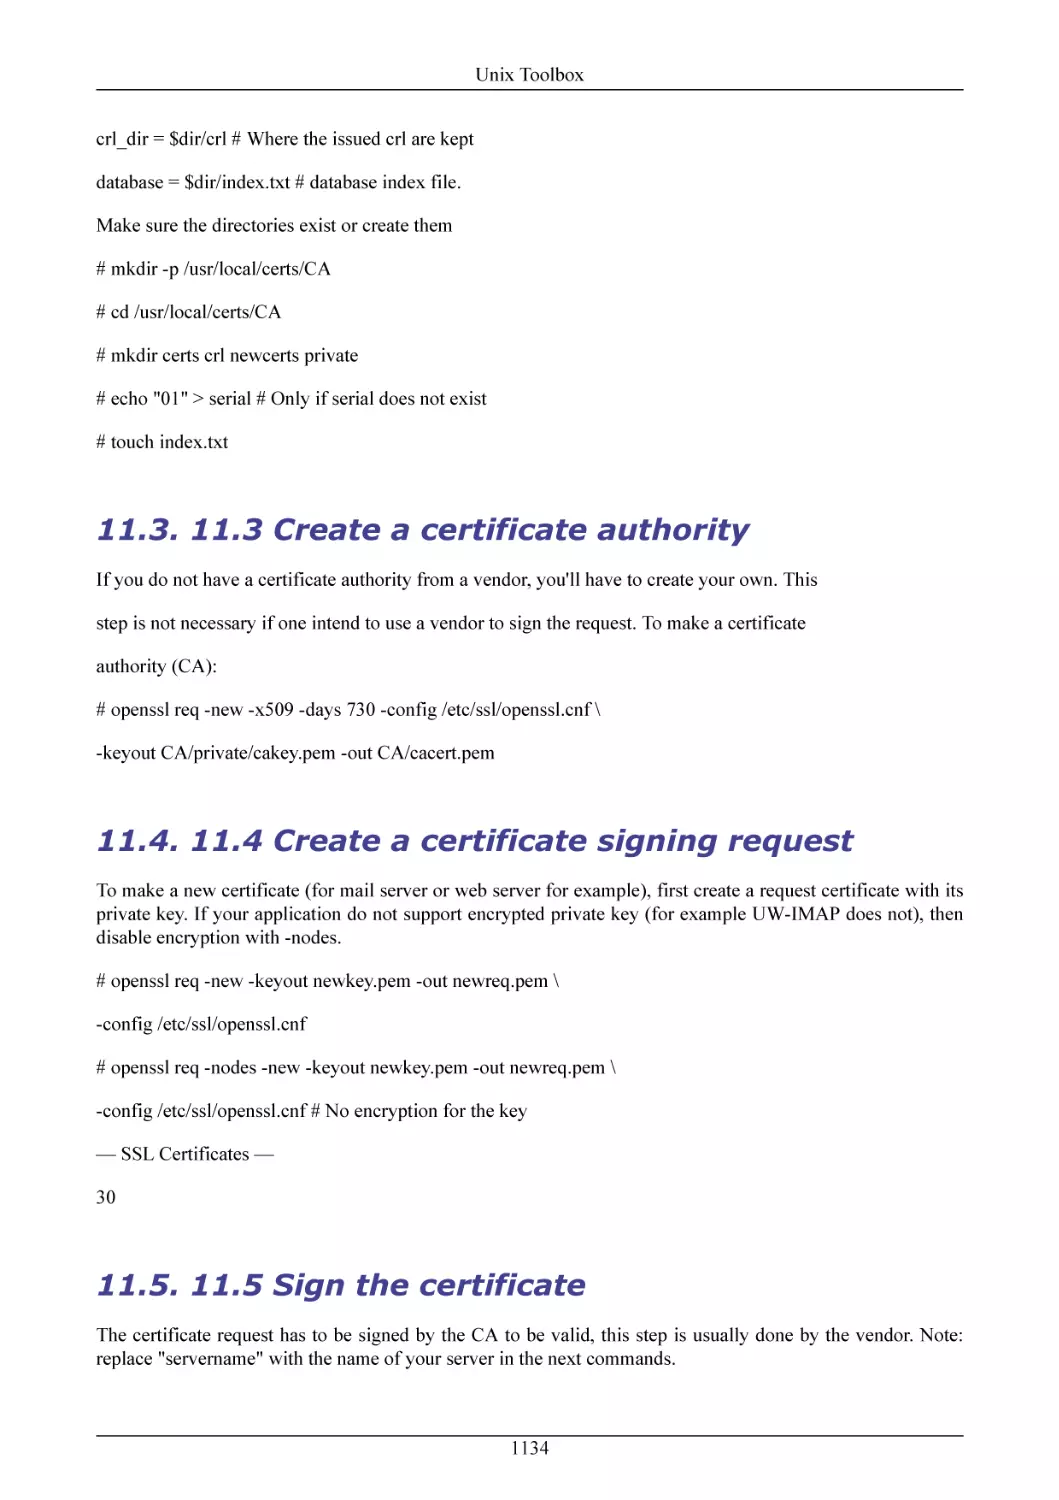 11.3 Create a certificate authority
11.4 Create a certificate signing request
11.5 Sign the certificate